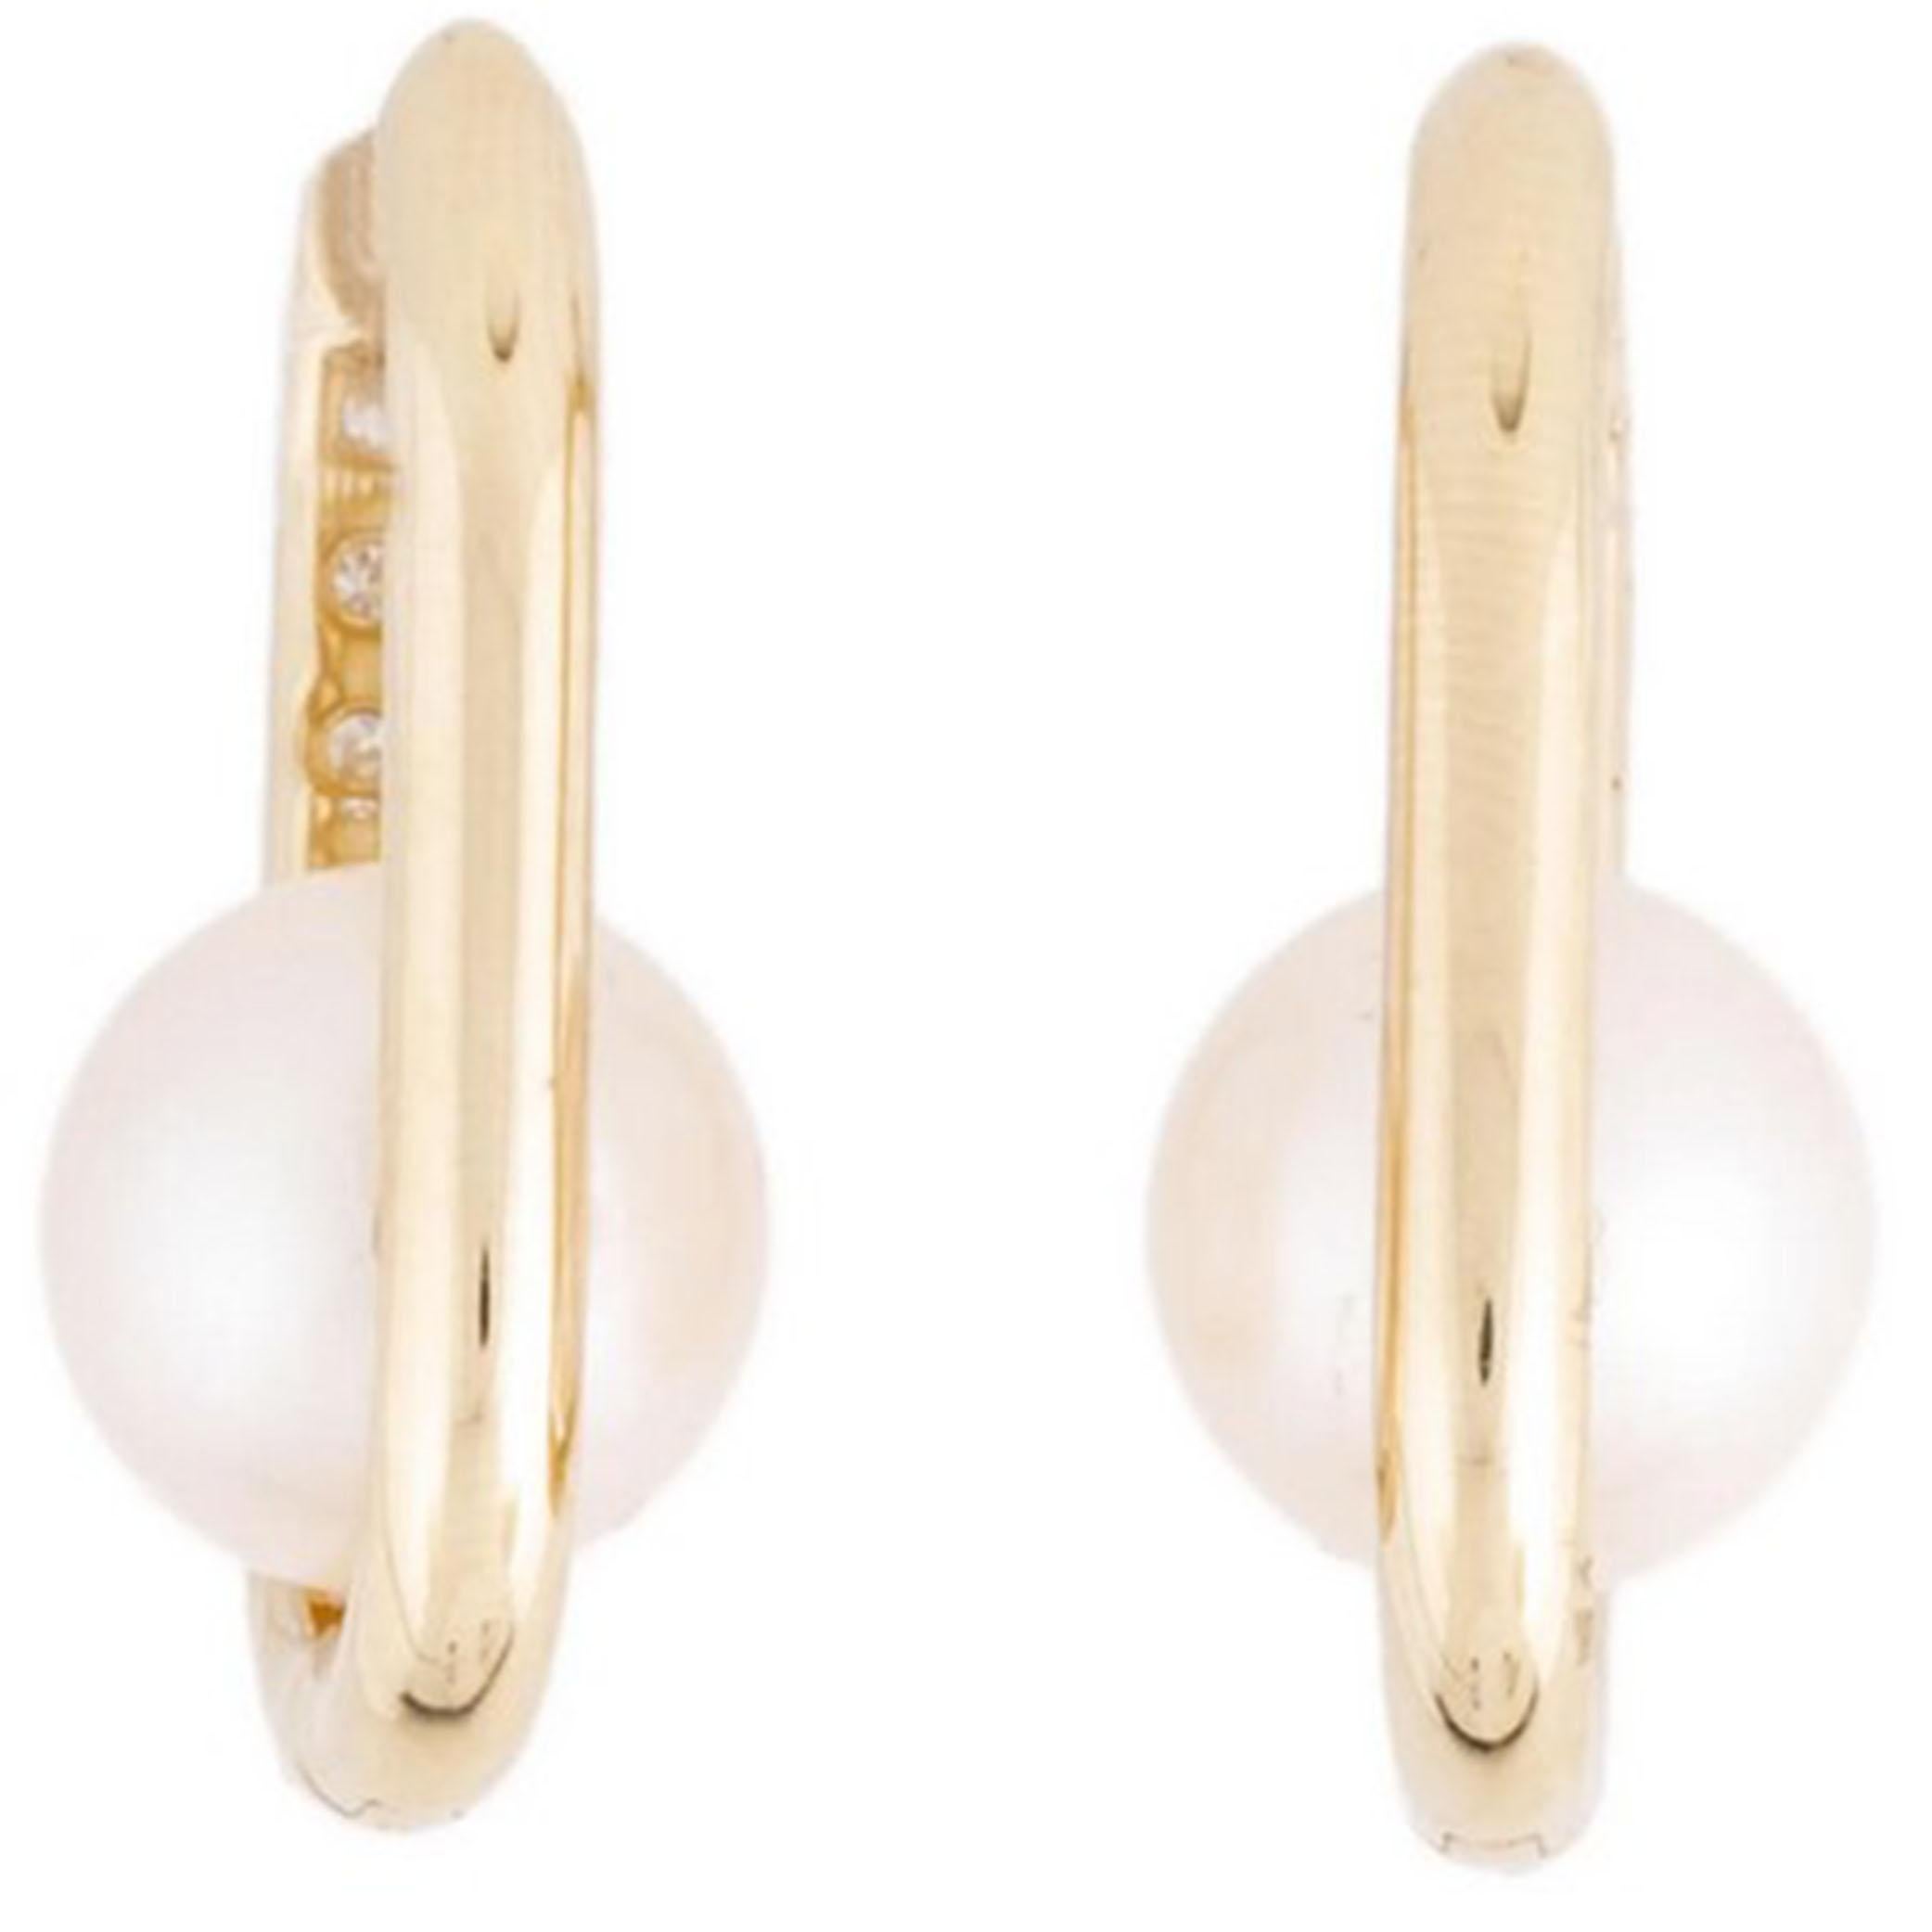 Origin: Japan
Pearl Type: Akoya Pearls
Pearl Size: 8.5 - 9.0 MM in Diameter
Pearl Color: White
Pearl Shape: Round 
Pearl Surface: AAA Flawless
Pearl Luster: AAA Gem
Pearl Nacre: Top
Diamond:0.20ct
Gold: 14kt Yellow
Seven Seas pearls paper clip